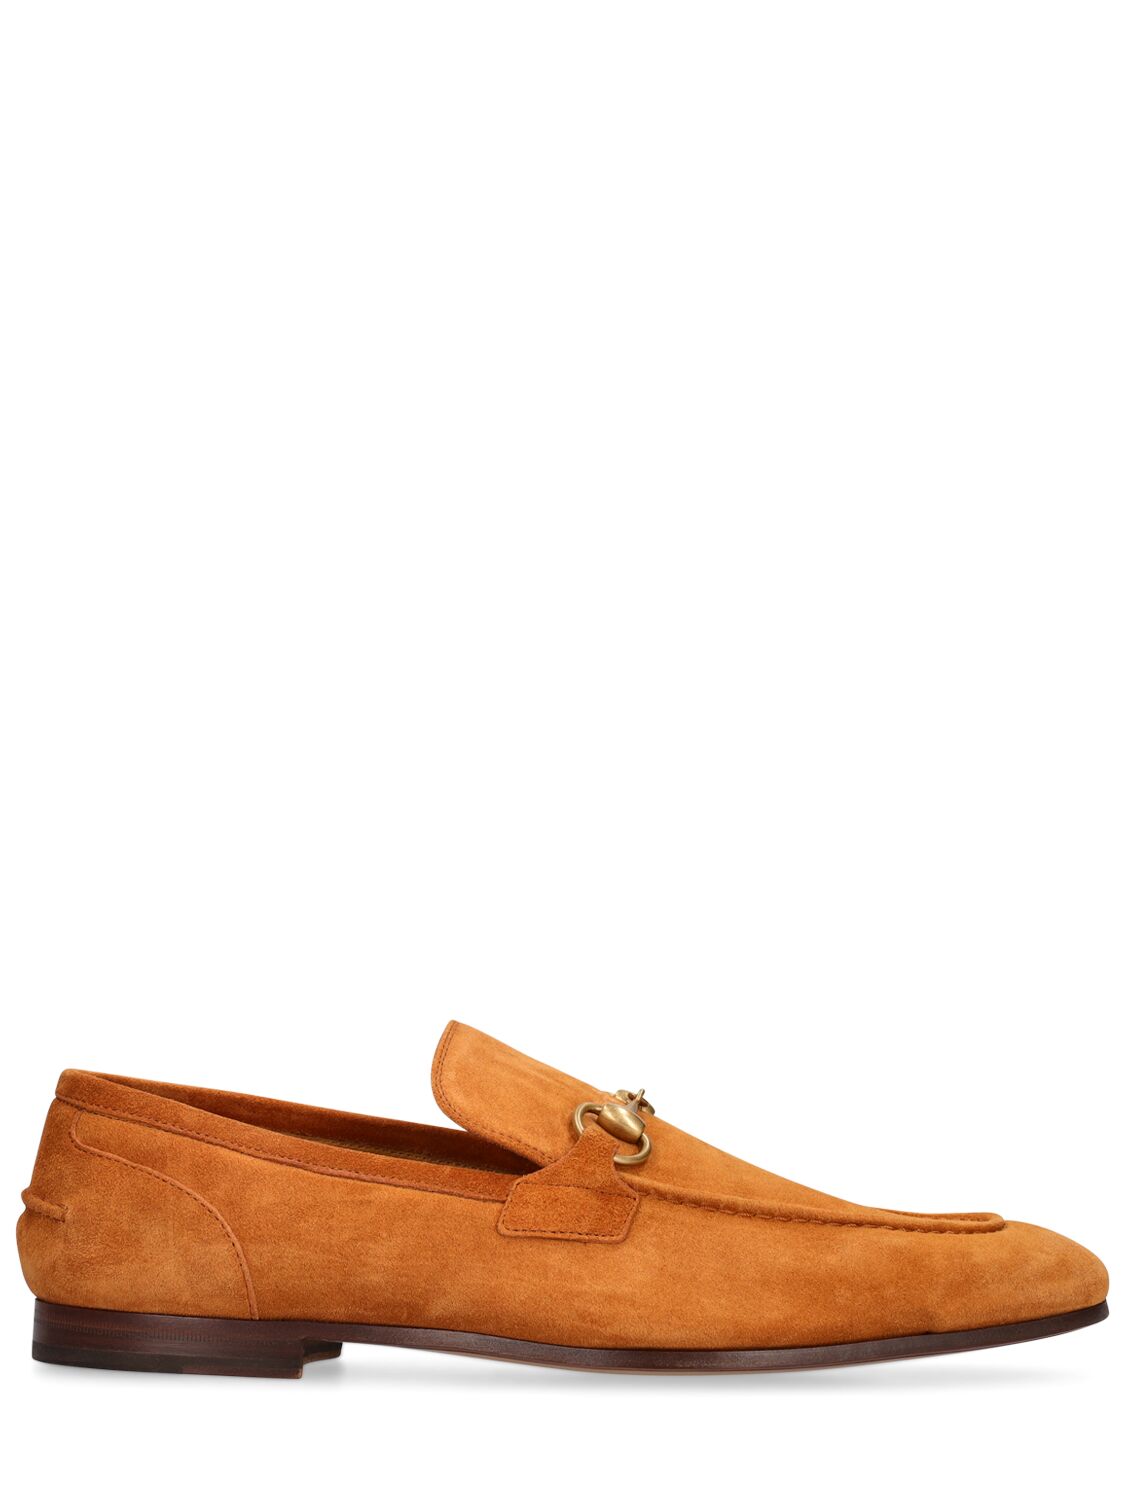 GUCCI GG SUEDE LEATHER LOAFERS